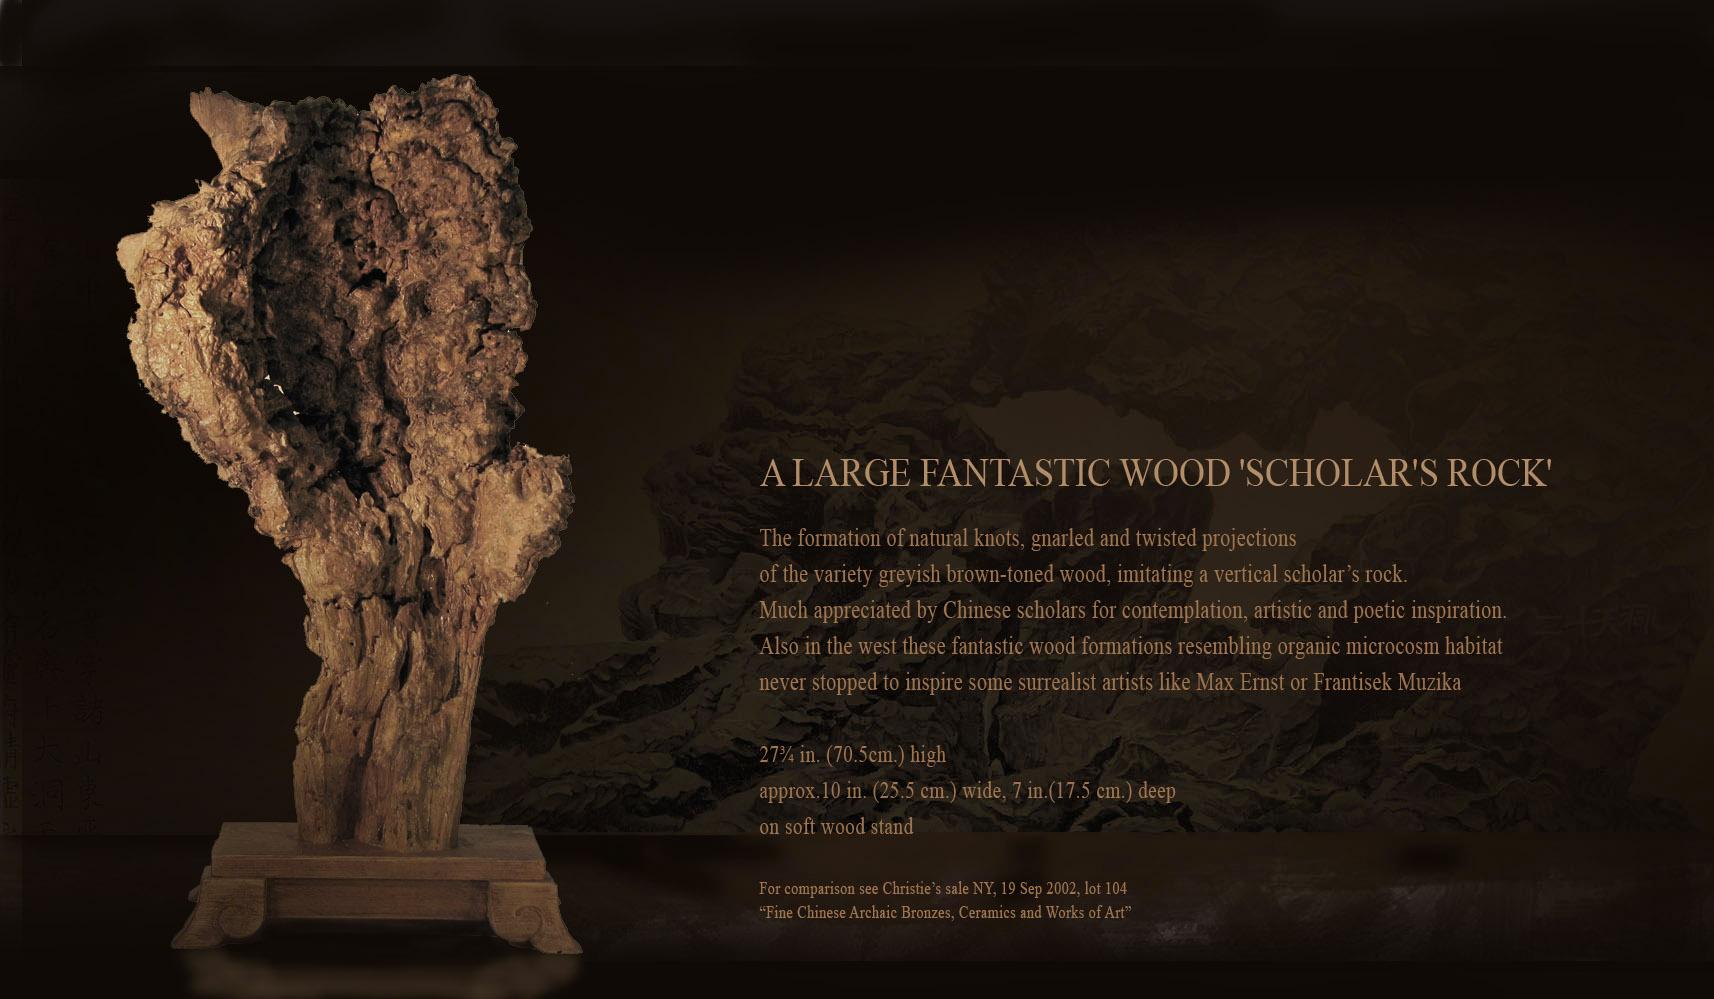 A large fantastic wood 'scholar's rock'

The formation of natural knots, gnarled and twisted projections 
Of the variety greyish brown-toned wood, imitating a vertical scholar’s rock. 
Much appreciated by Chinese scholars for contemplation,